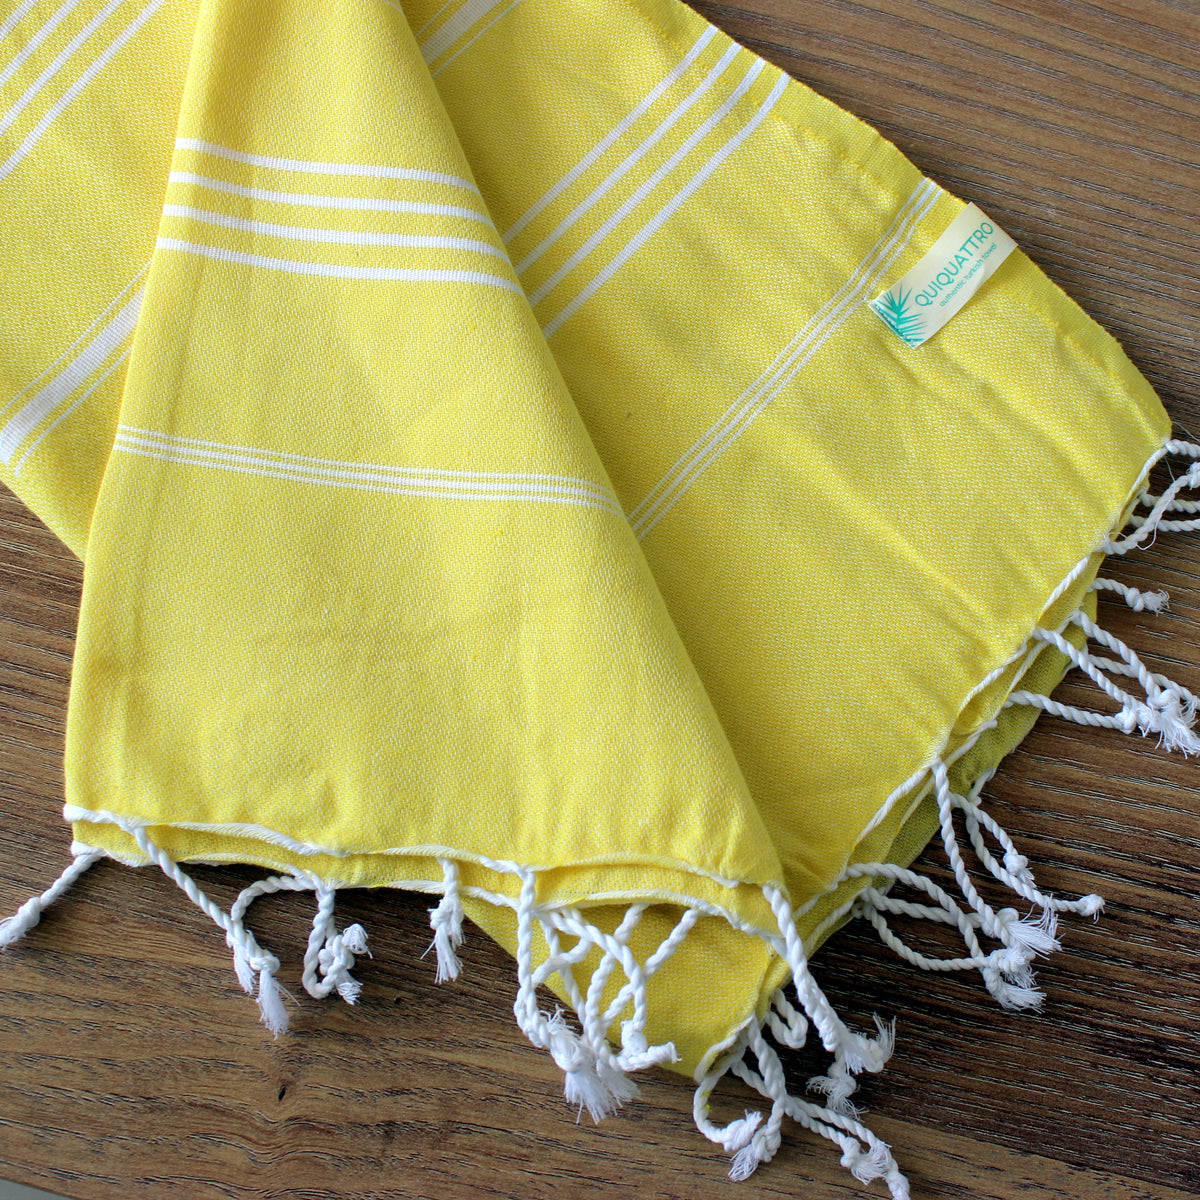 https://cdn.shopify.com/s/files/1/0622/9809/5841/products/Authentic_turkish_towel_yellow.jpg?v=1649263672&width=1200